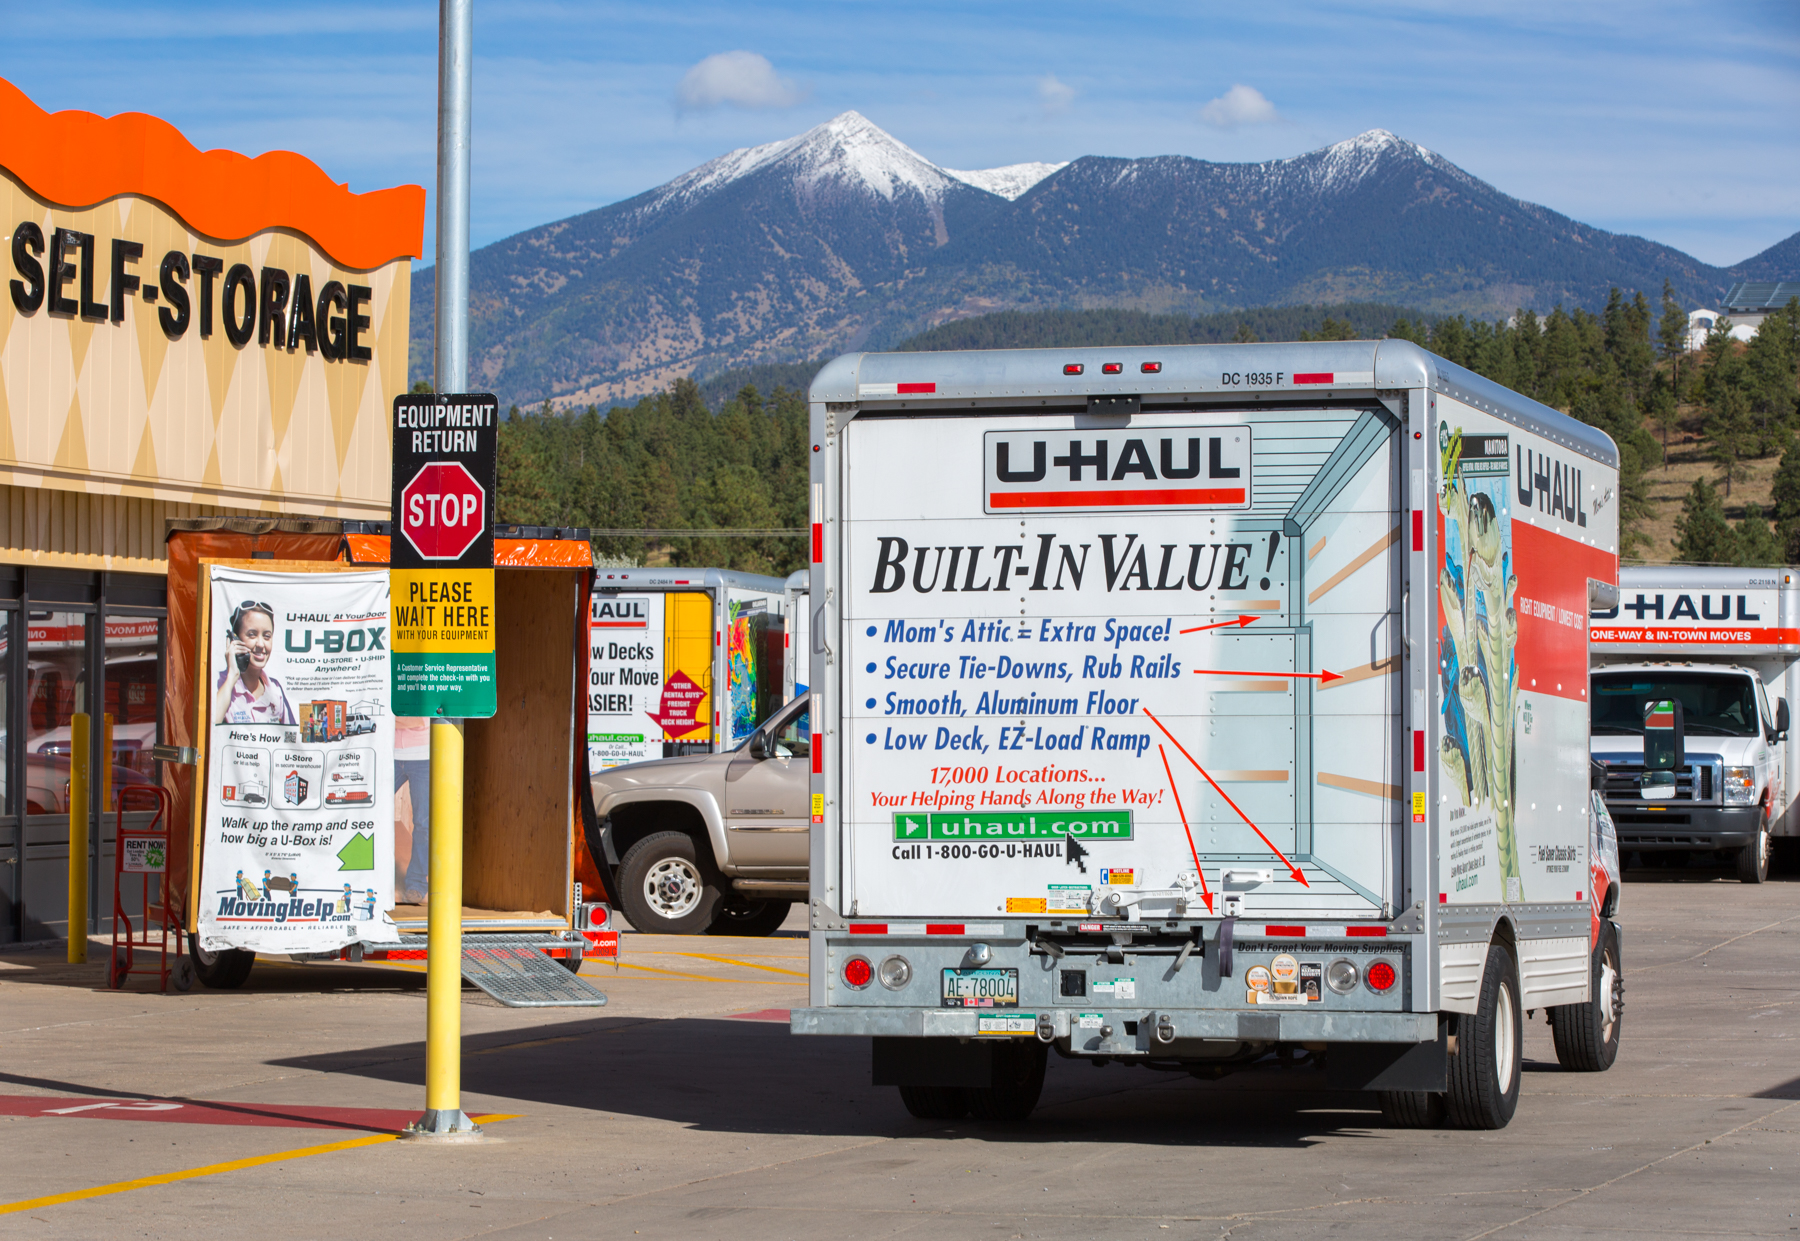 COLORADO is the No. 7 U-Haul Growth State of 2021